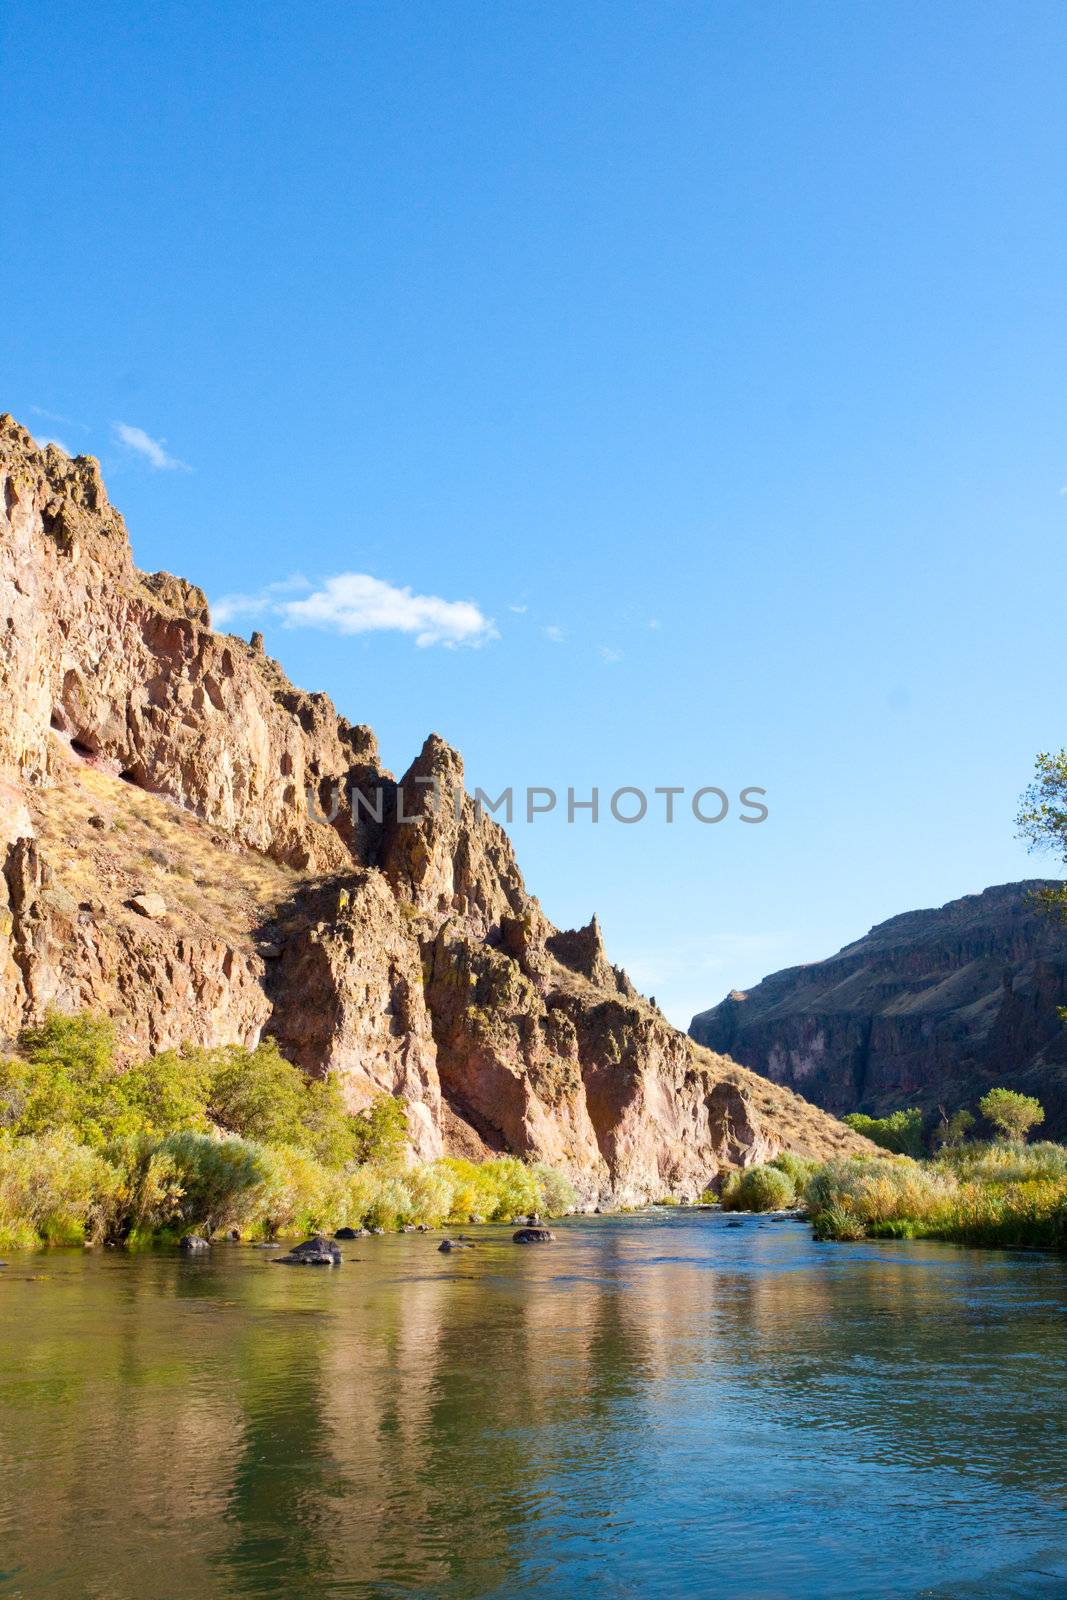 Owyhee River Canyon by joshuaraineyphotography